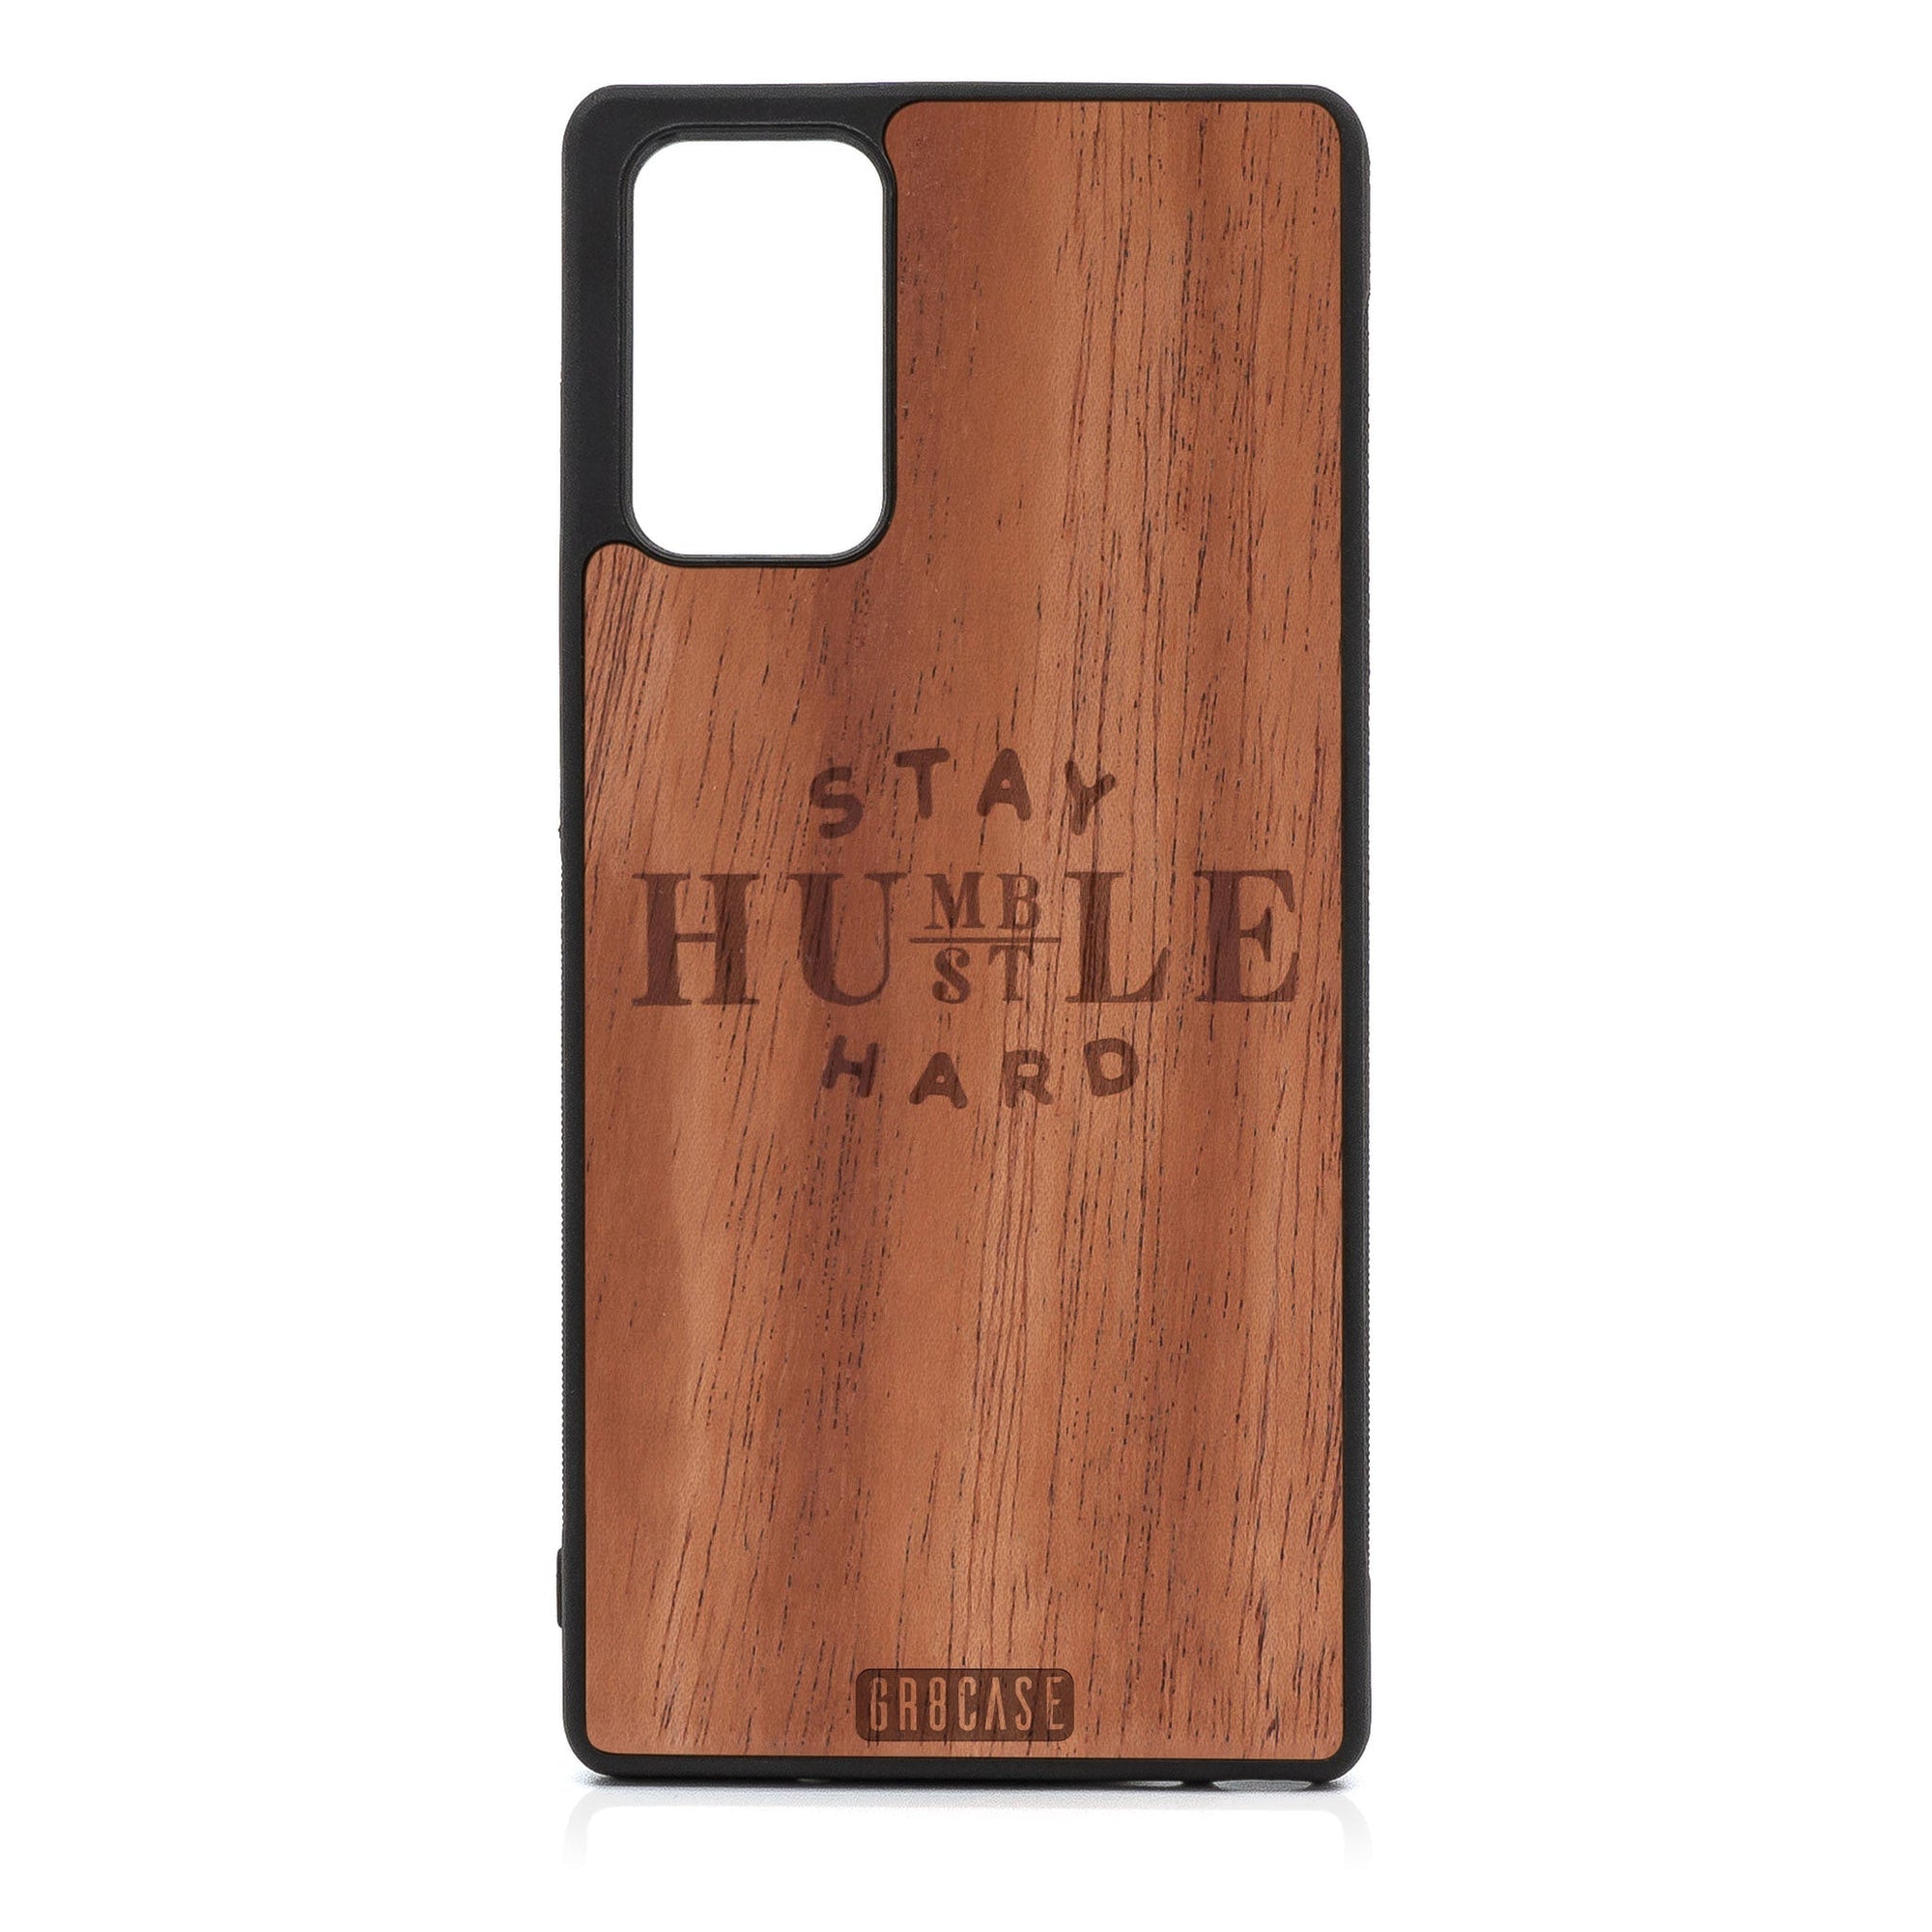 Stay Humble Hustle Hard Design Wood Case For Samsung Galaxy A33 5G